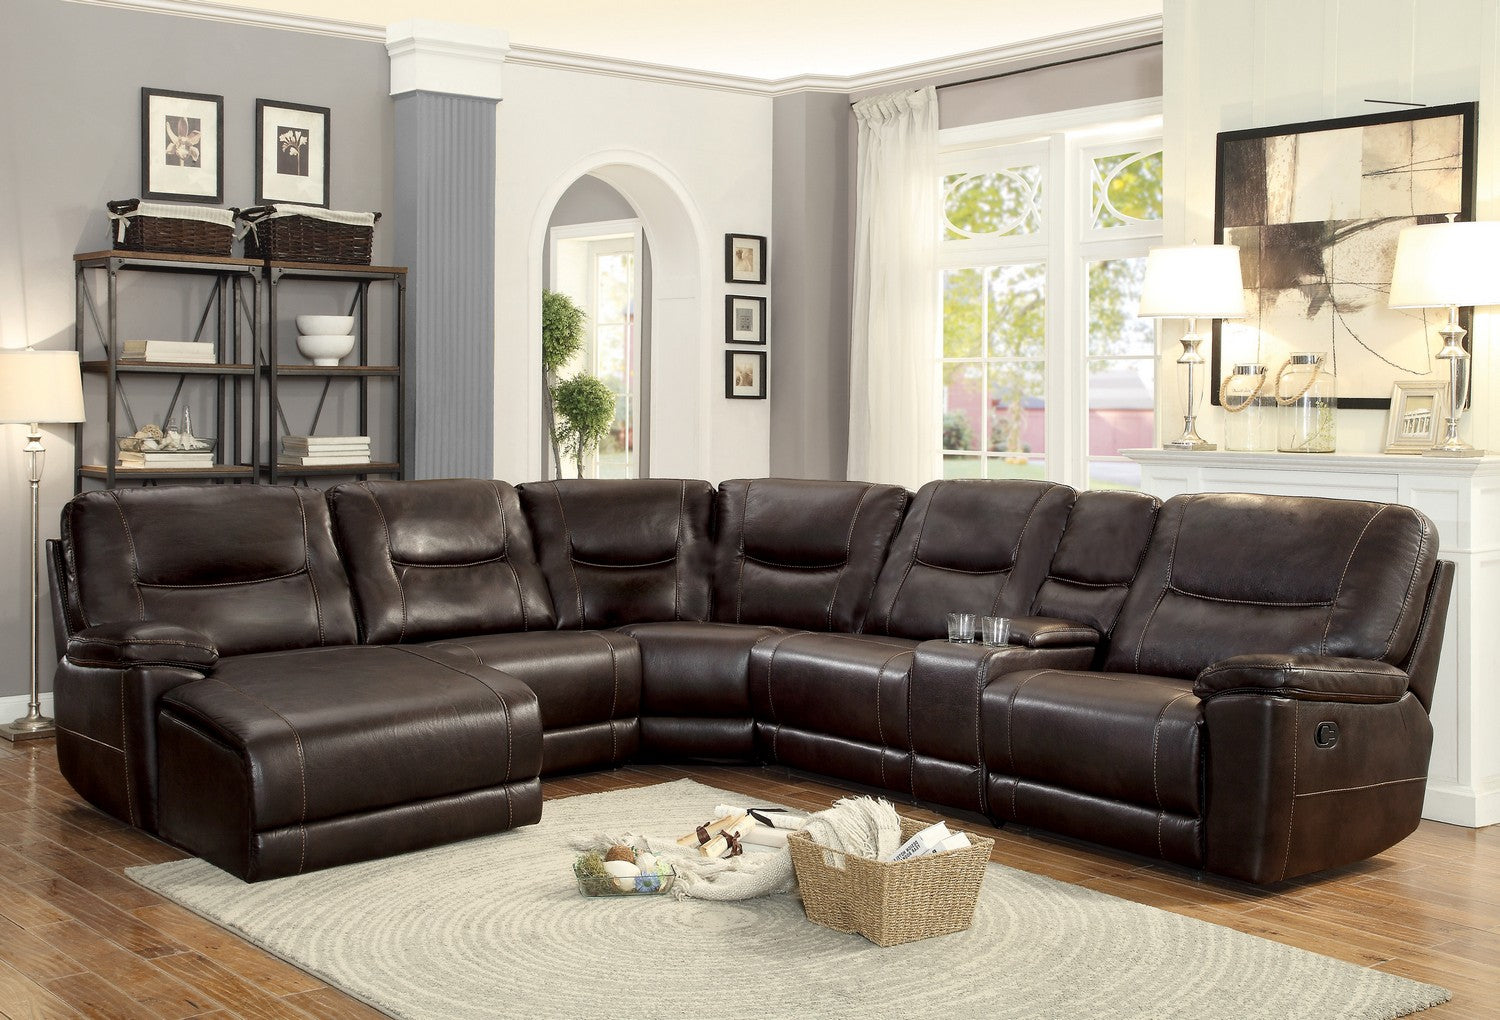 camel brown leather reclining sofa